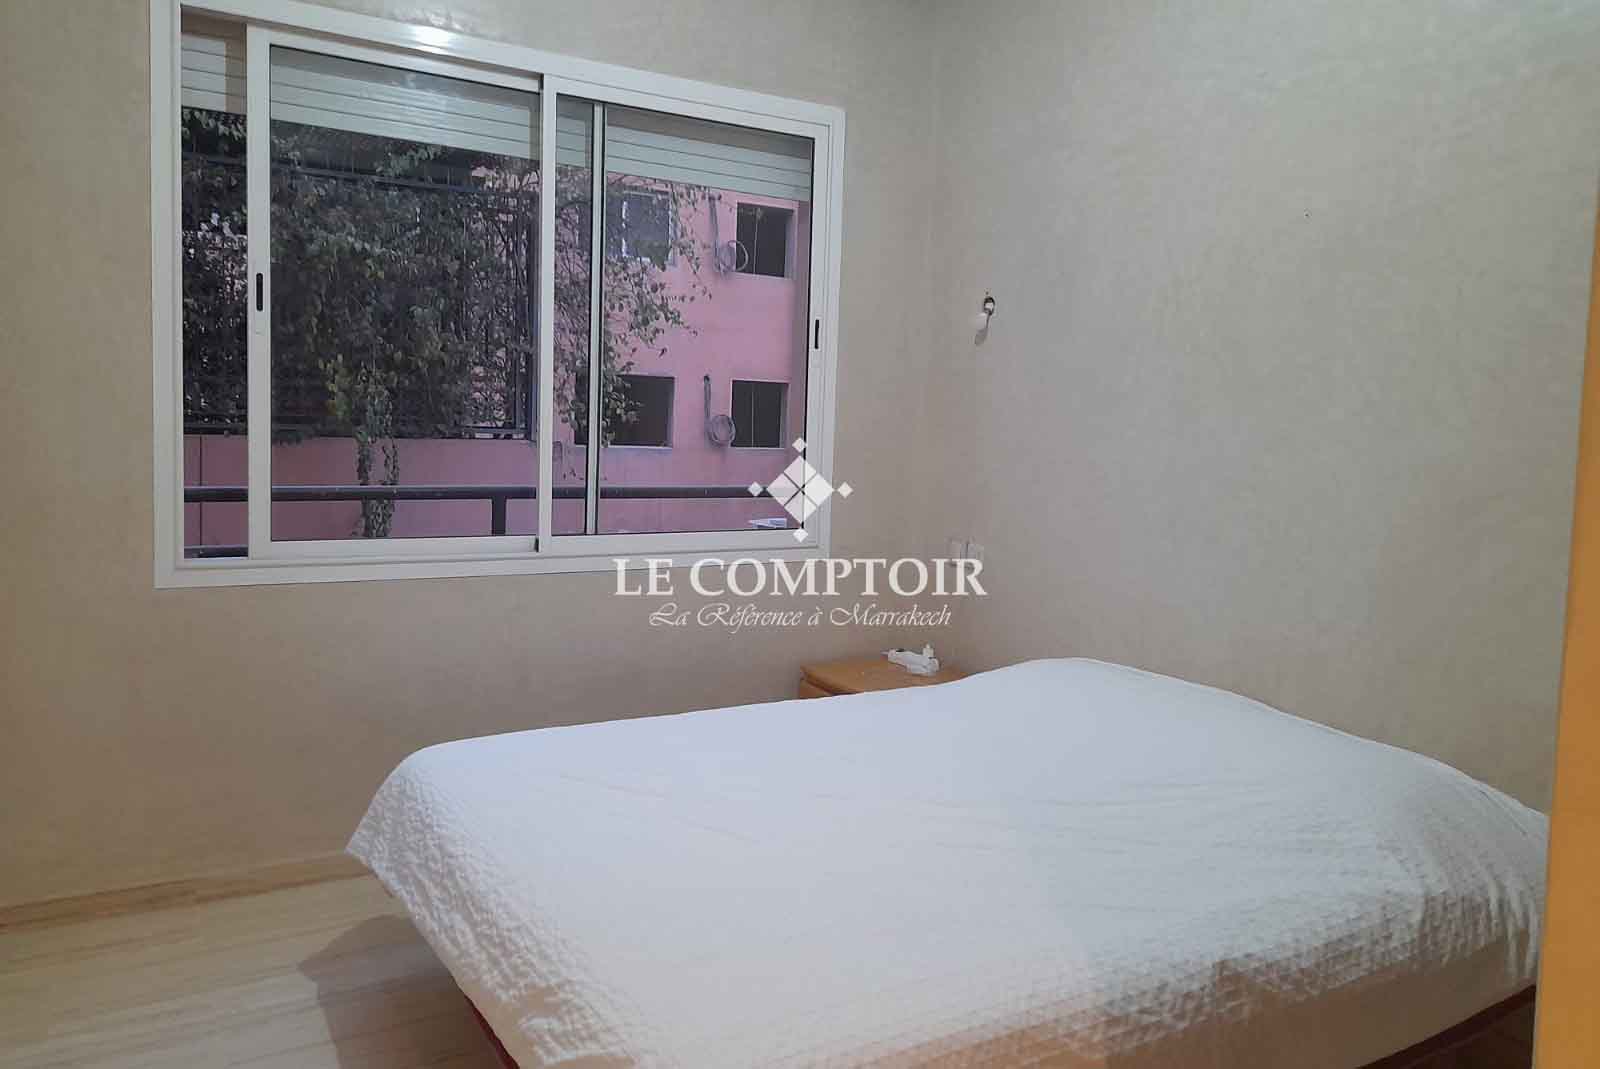 Le Comptoir Immobilier Agence Immobiliere Marrakech Location Appartement Camp El Ghoul Marrakech 3